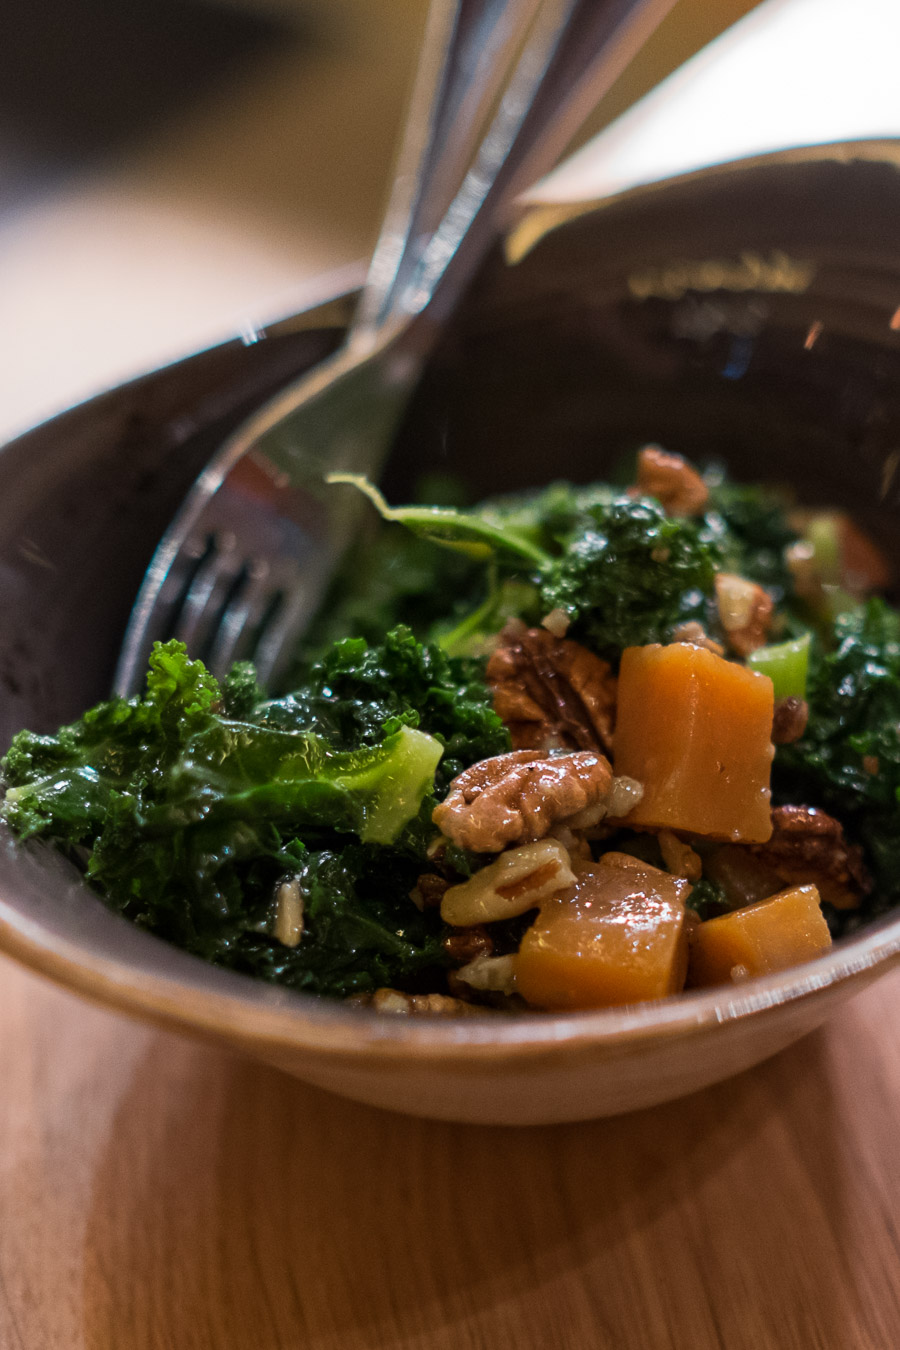 Kale and yams (AU$12) - candied yams, pecans and sweet mustard dressing